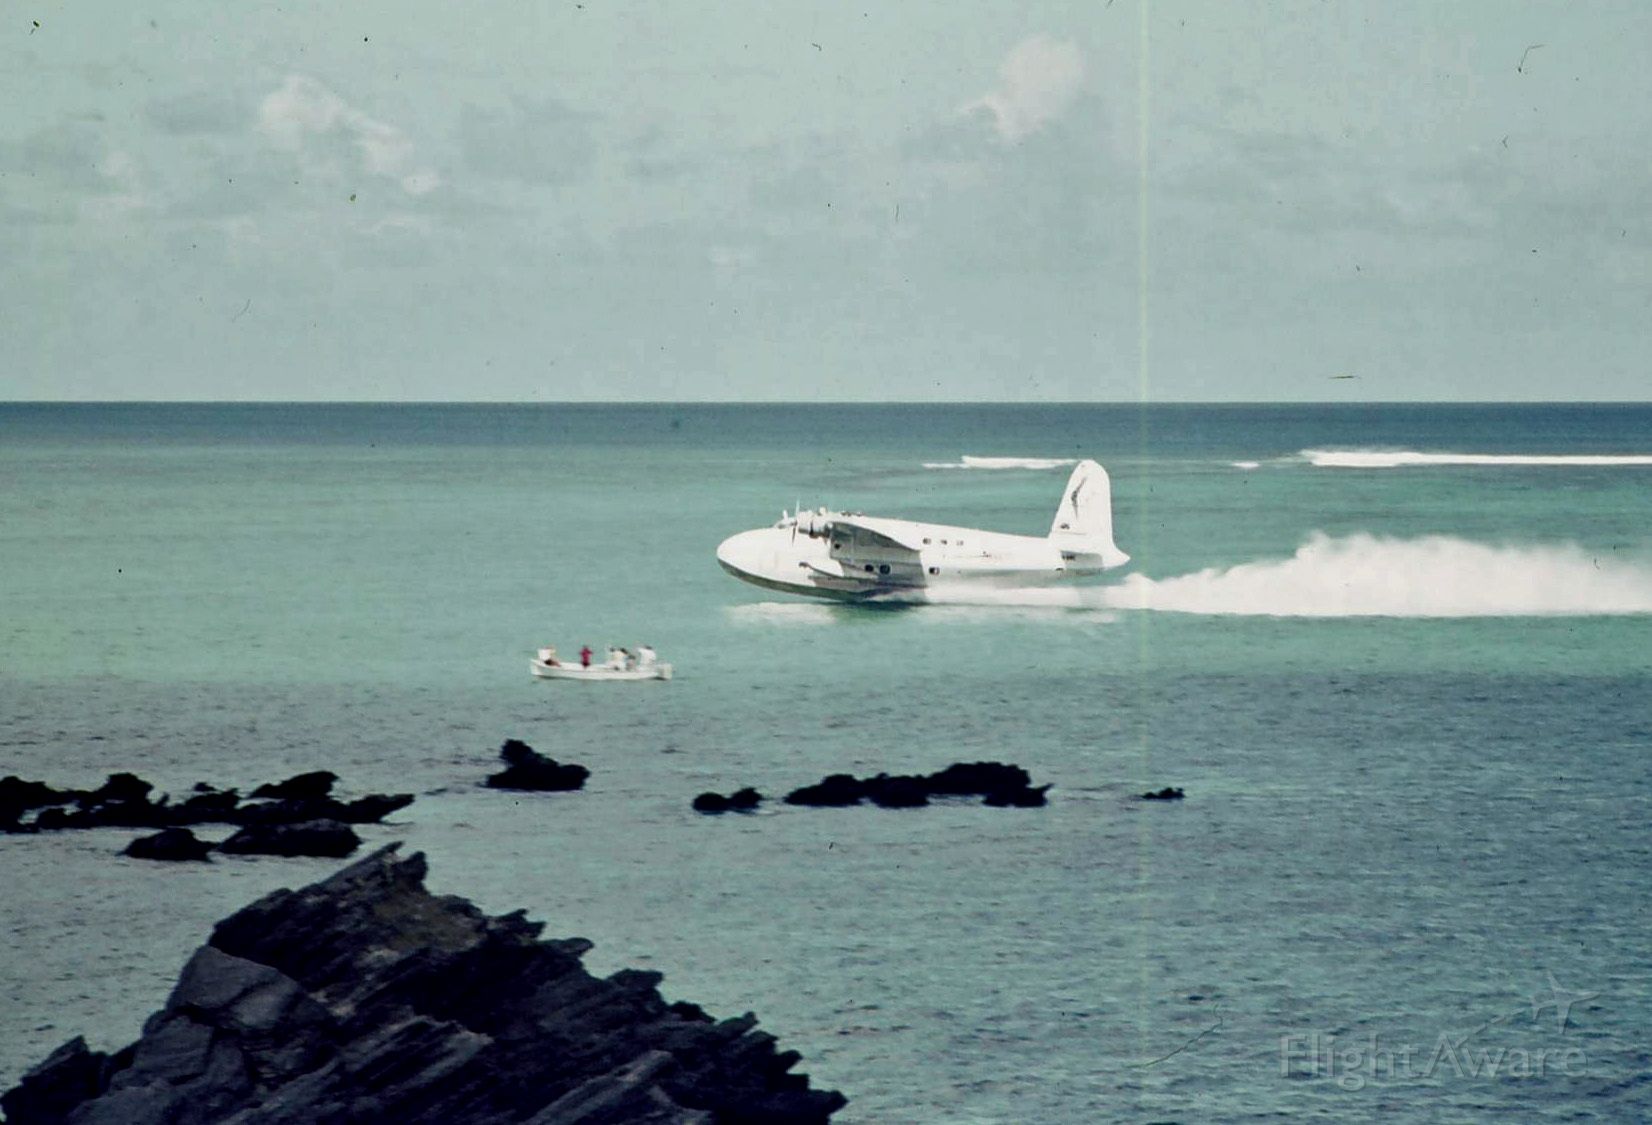 Short Sandringham (VH-BRC) - Sunderland/Sandringham conversion Beachcomber taking off from Lord Howe Island c. 1974 - one of the last flights on the Rose Bay service. Departure from Rose Bay depended on arriving at Lord Howe lagoon at high  tide. Island airstrip was being built at this time and later serviced Fokker Friendship from Sydney, ending Flying Boat commercial services in Australia.